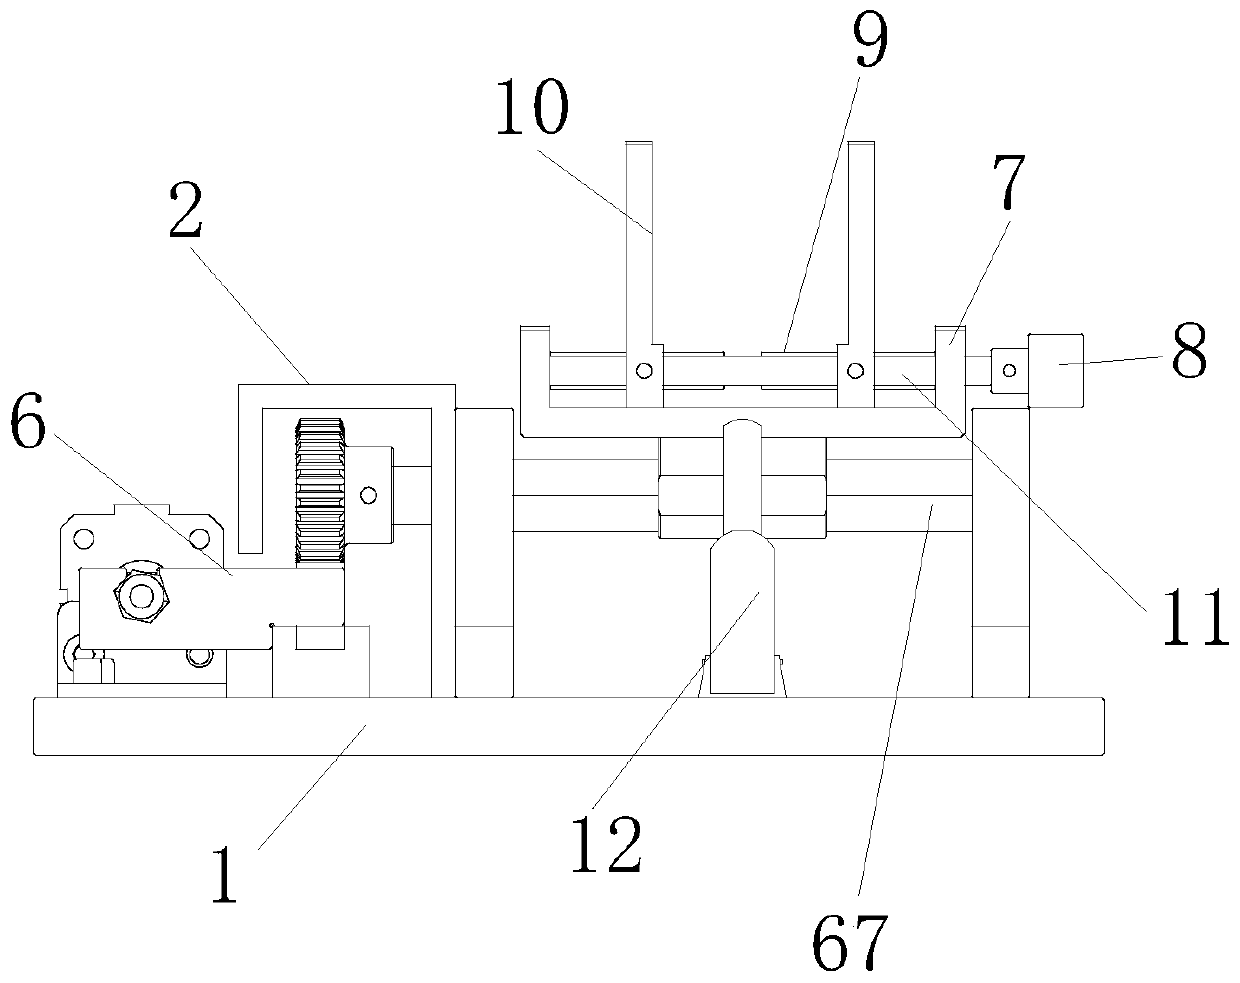 Auxiliary fixing device used for model making